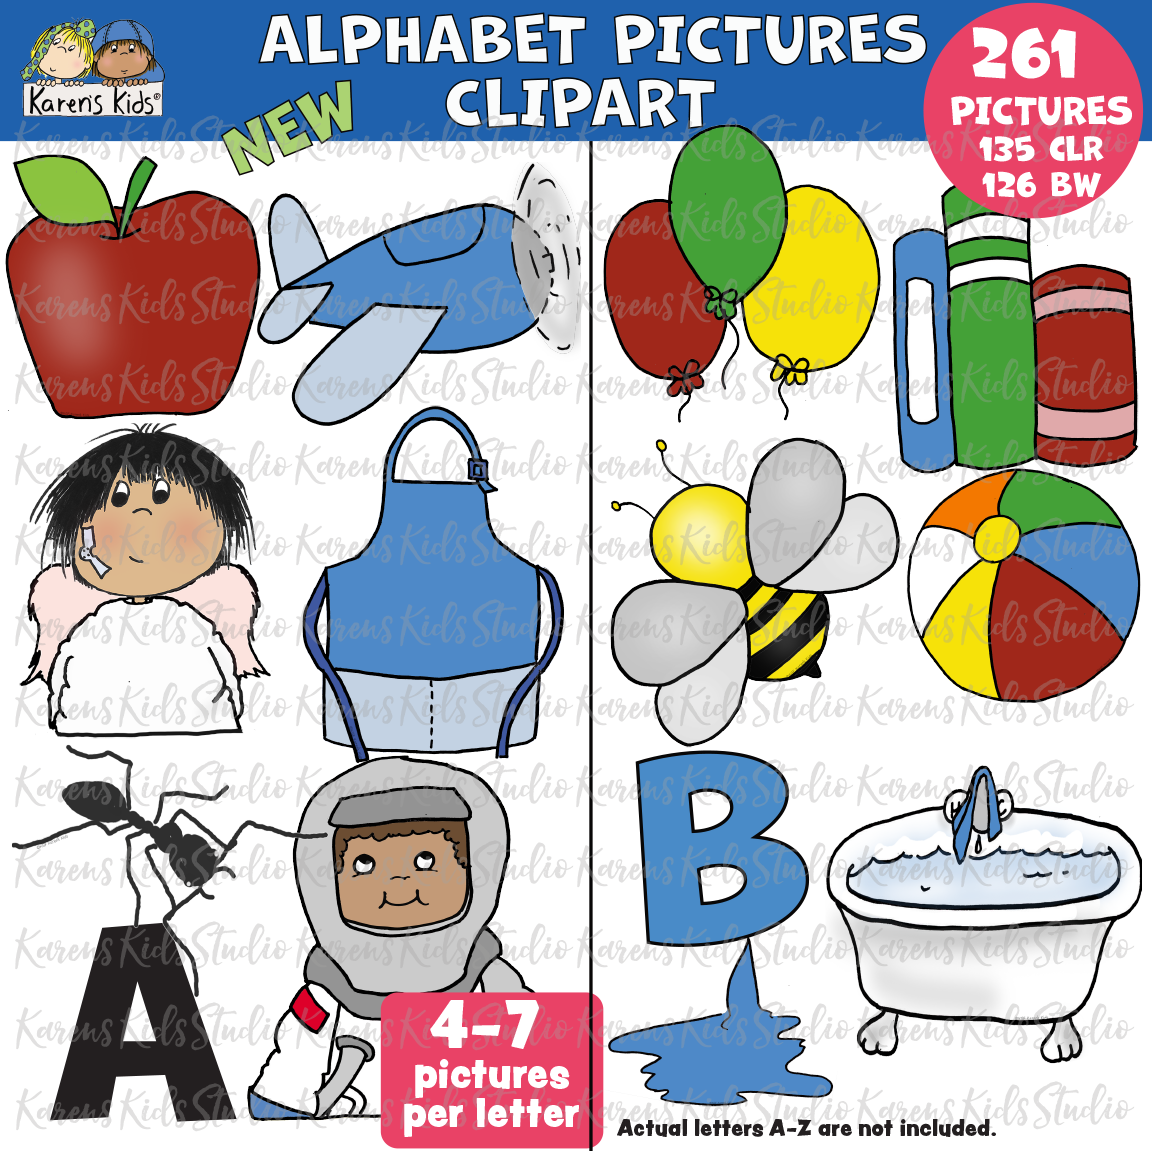 Picture with the title ALPHABET PICTURES CLIPART. 261 pictures, 135 color pictures, 126 black and white pictures. 4-7 pictures for each letter. 12 color pictures show samples of clipart, apple airplane, angel, apron, ant, astronaut and more.